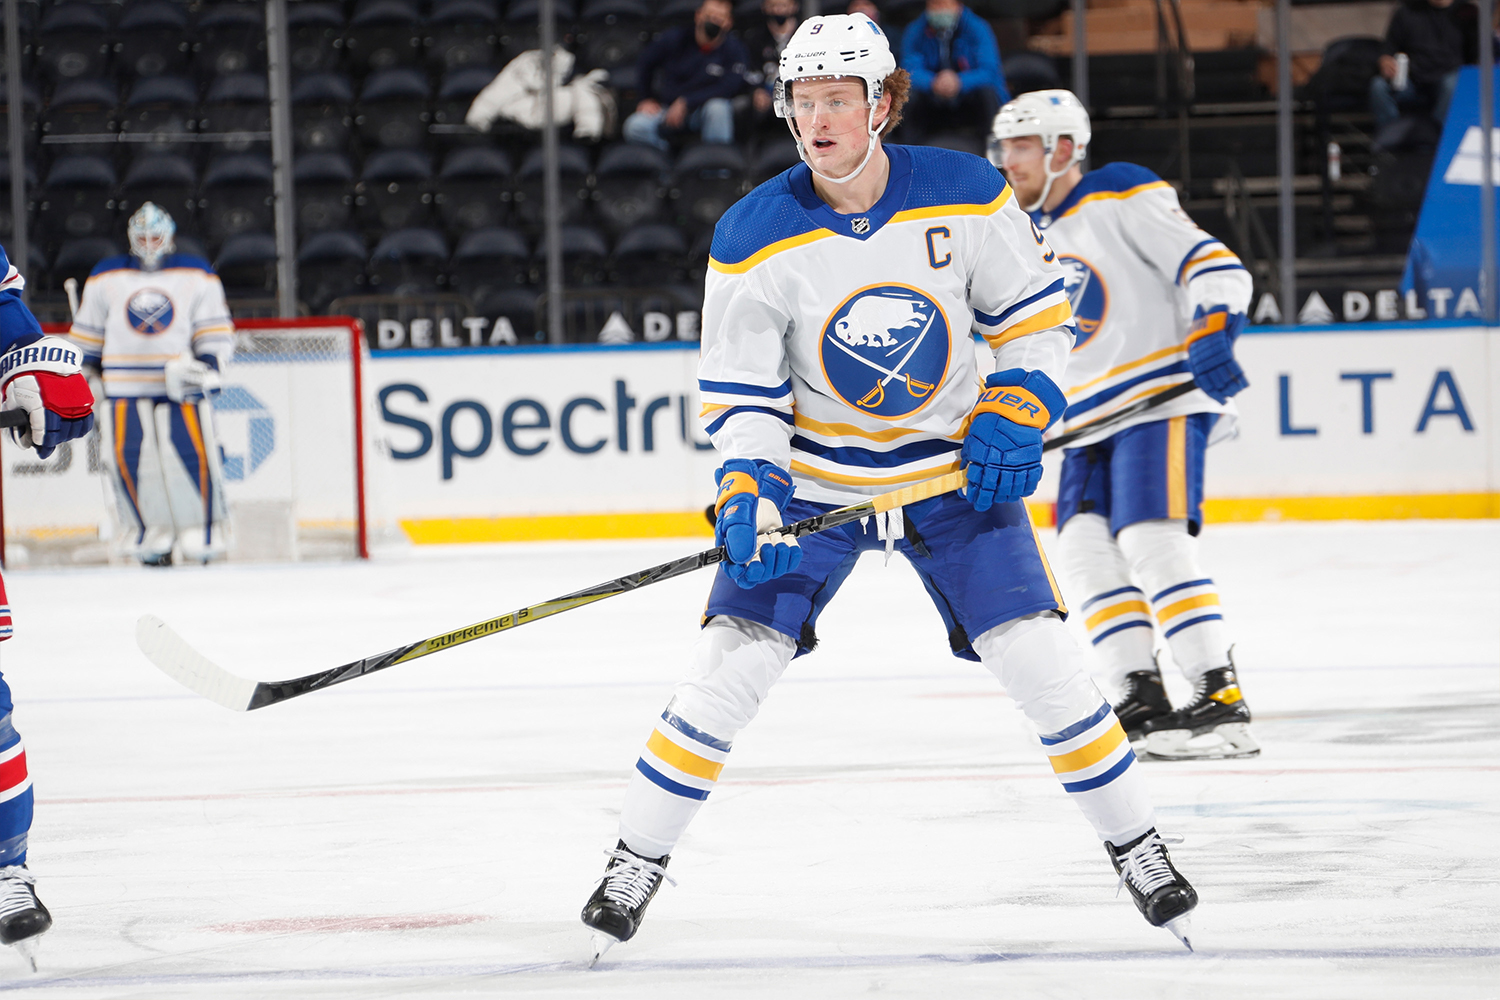 Jack Eichel #9 of the Buffalo Sabres skates against the New York Rangers at Madison Square Garden on March 2, 2021